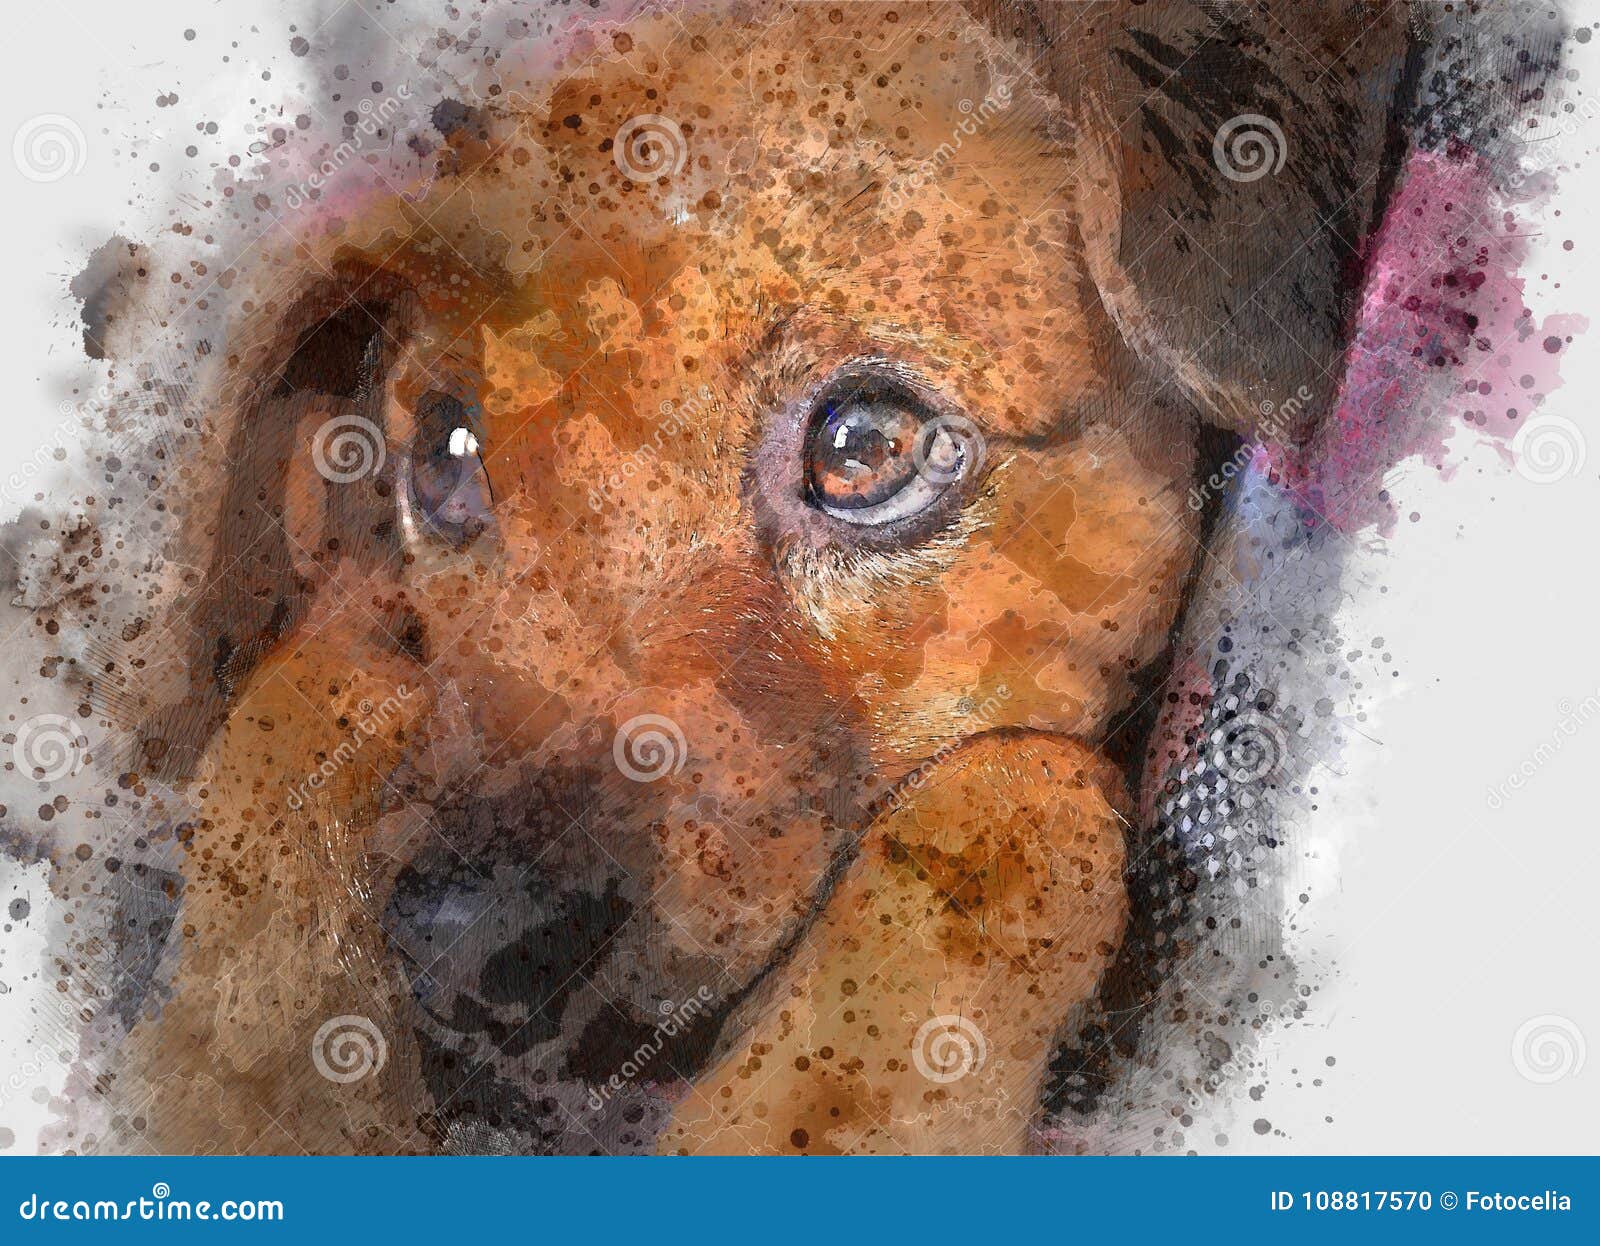 Cartoon Style Prohibited Animal Abuse Poster Template Download on Pngtree